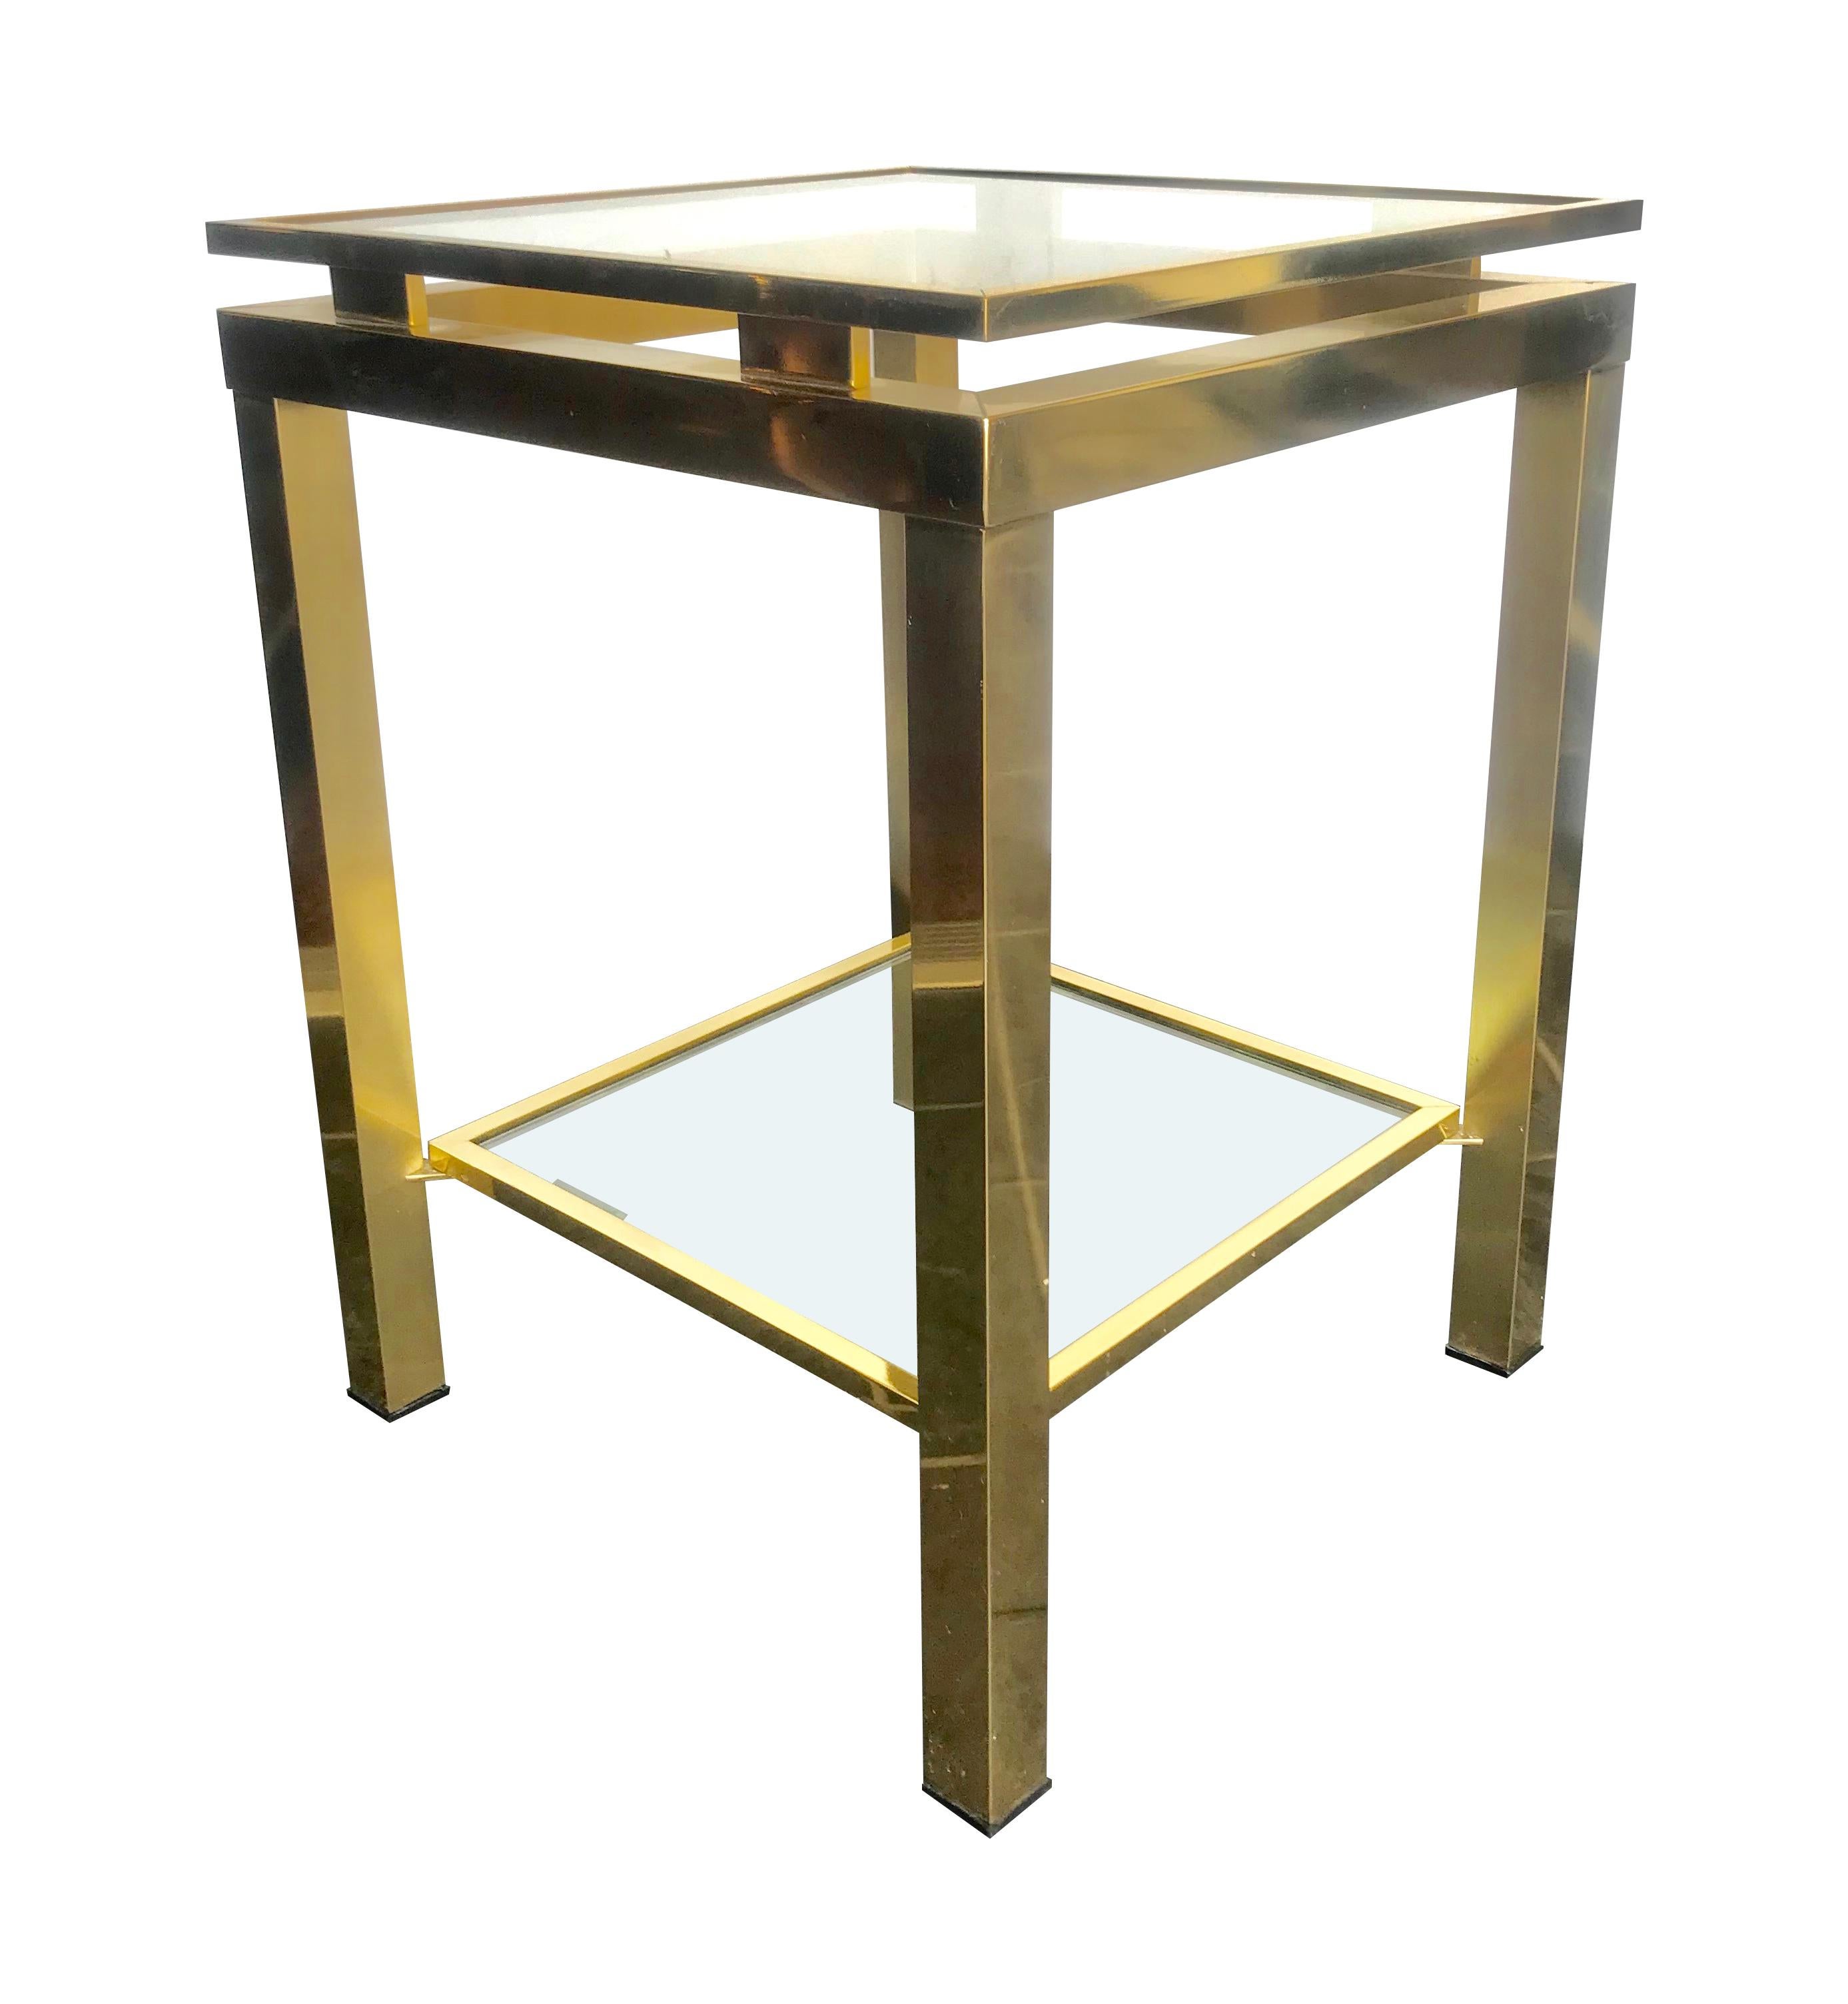 Pair of Guy Lefevre Style Polished Gilt Metal Side Tables with 2 Glass Shelves 1